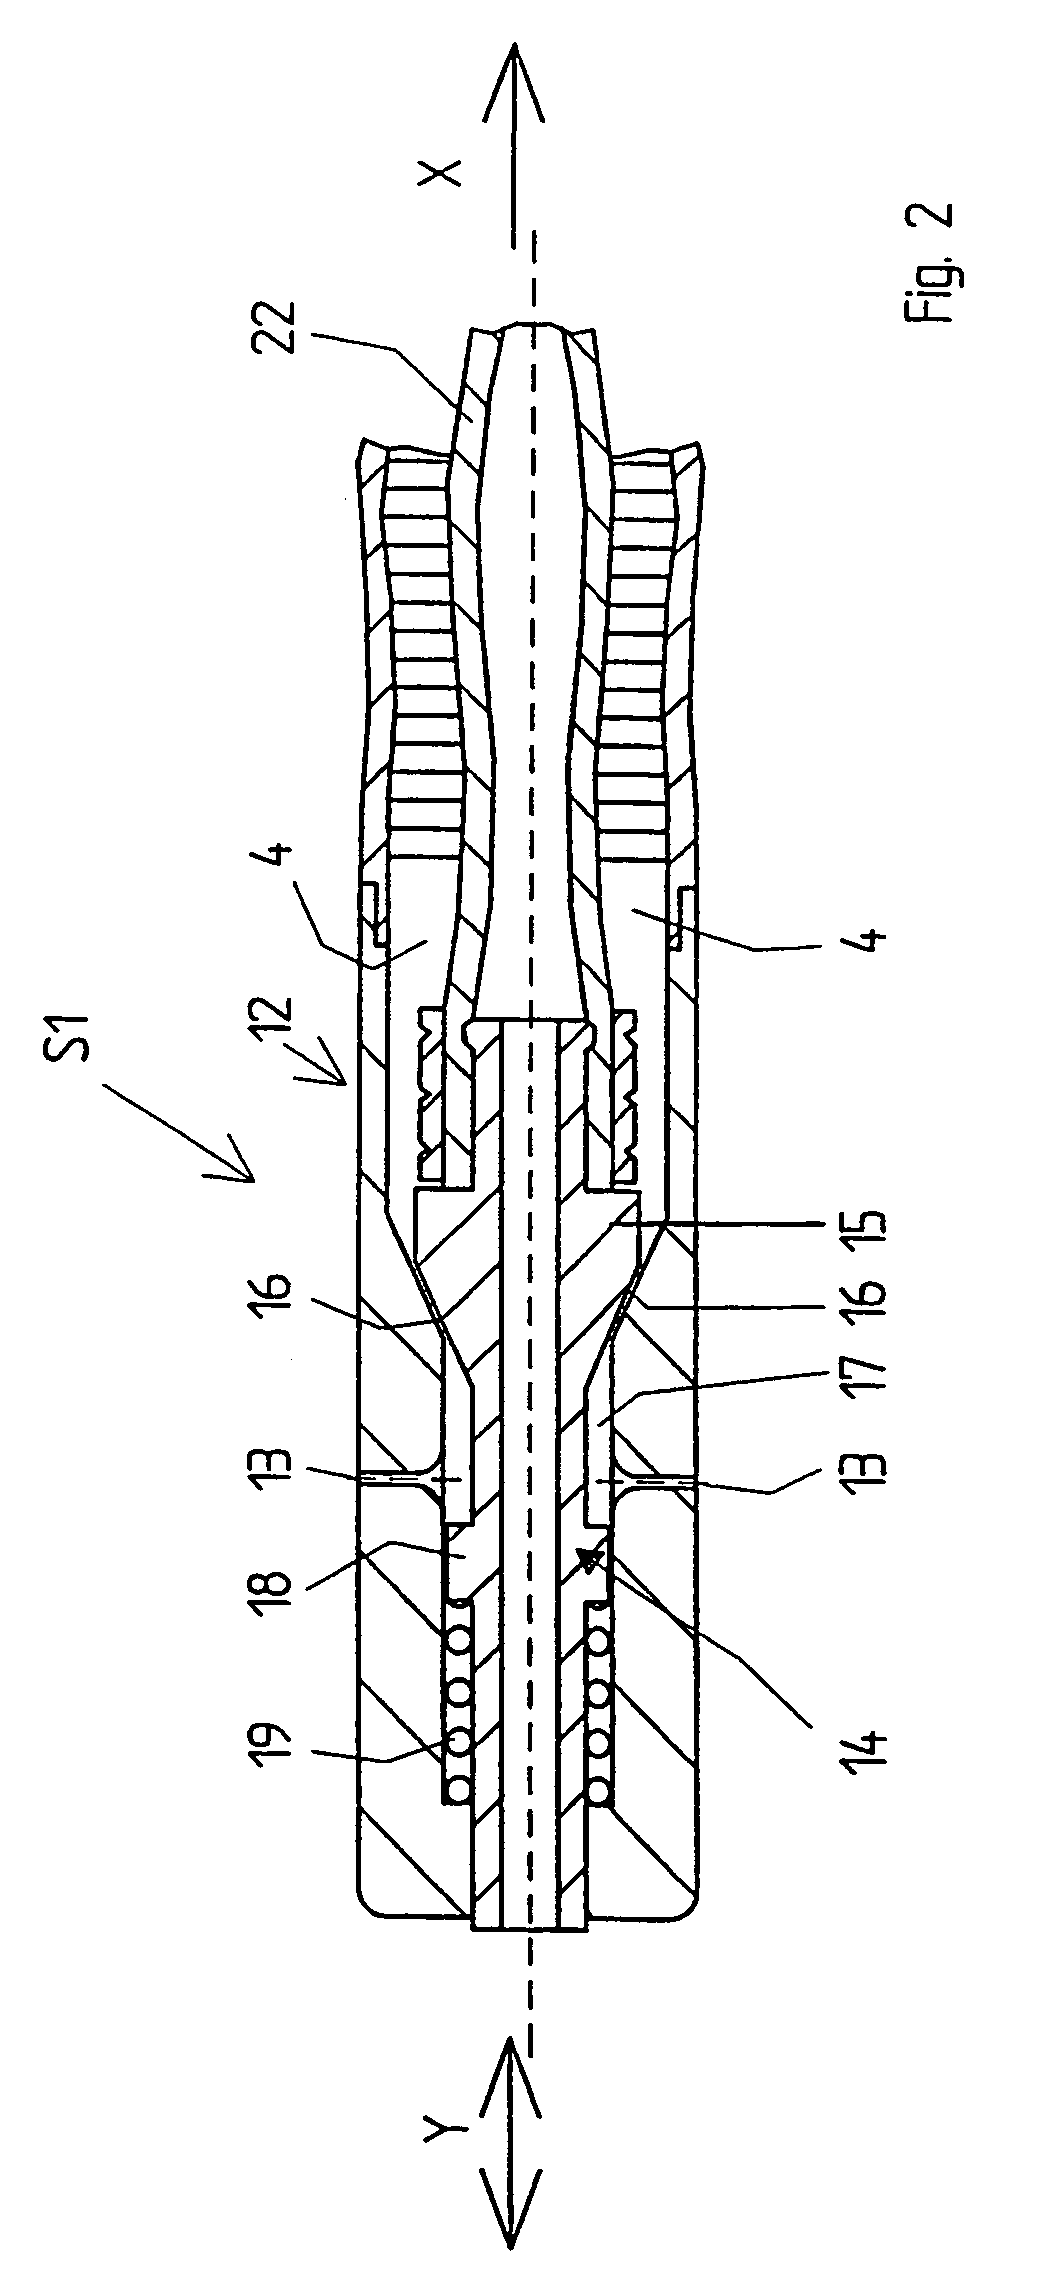 Method for severing or removing a biological structure, especially bones